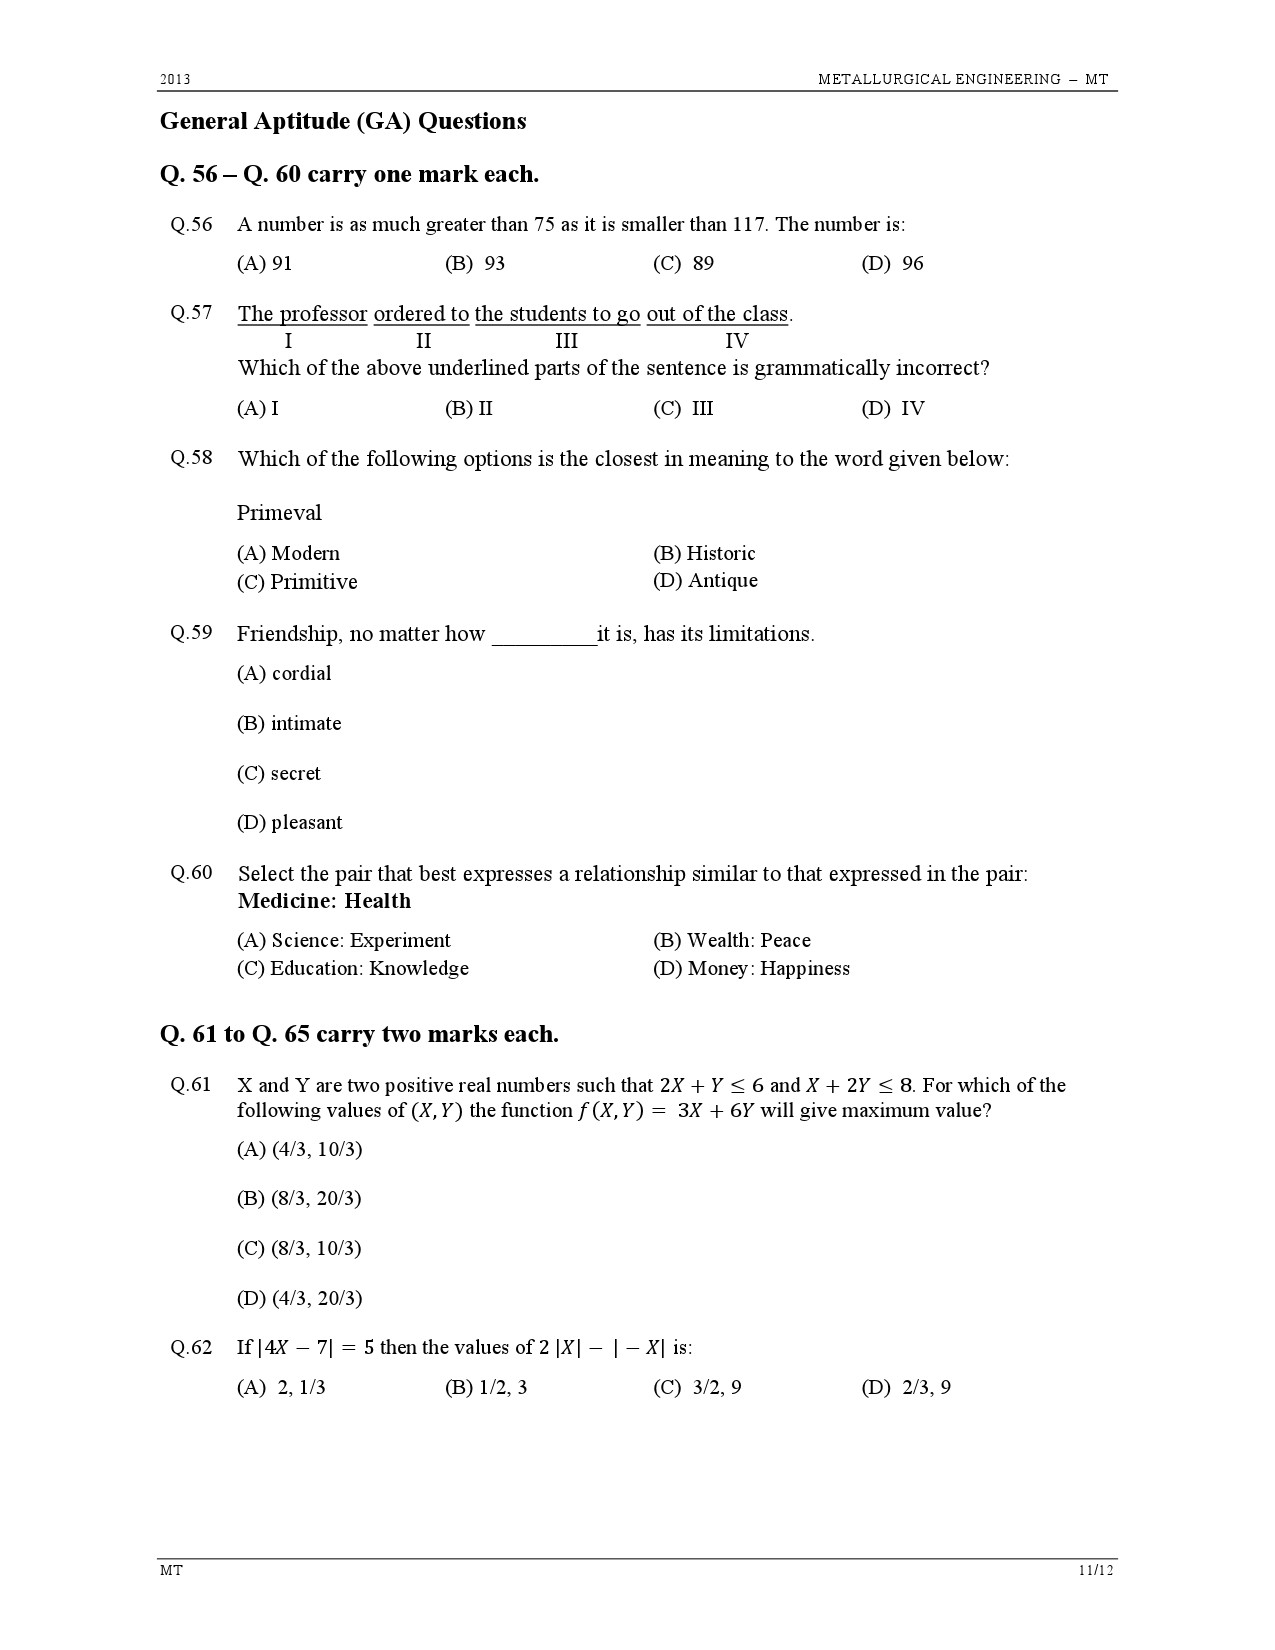 GATE Exam Question Paper 2013 Metallurgical Engineering 11